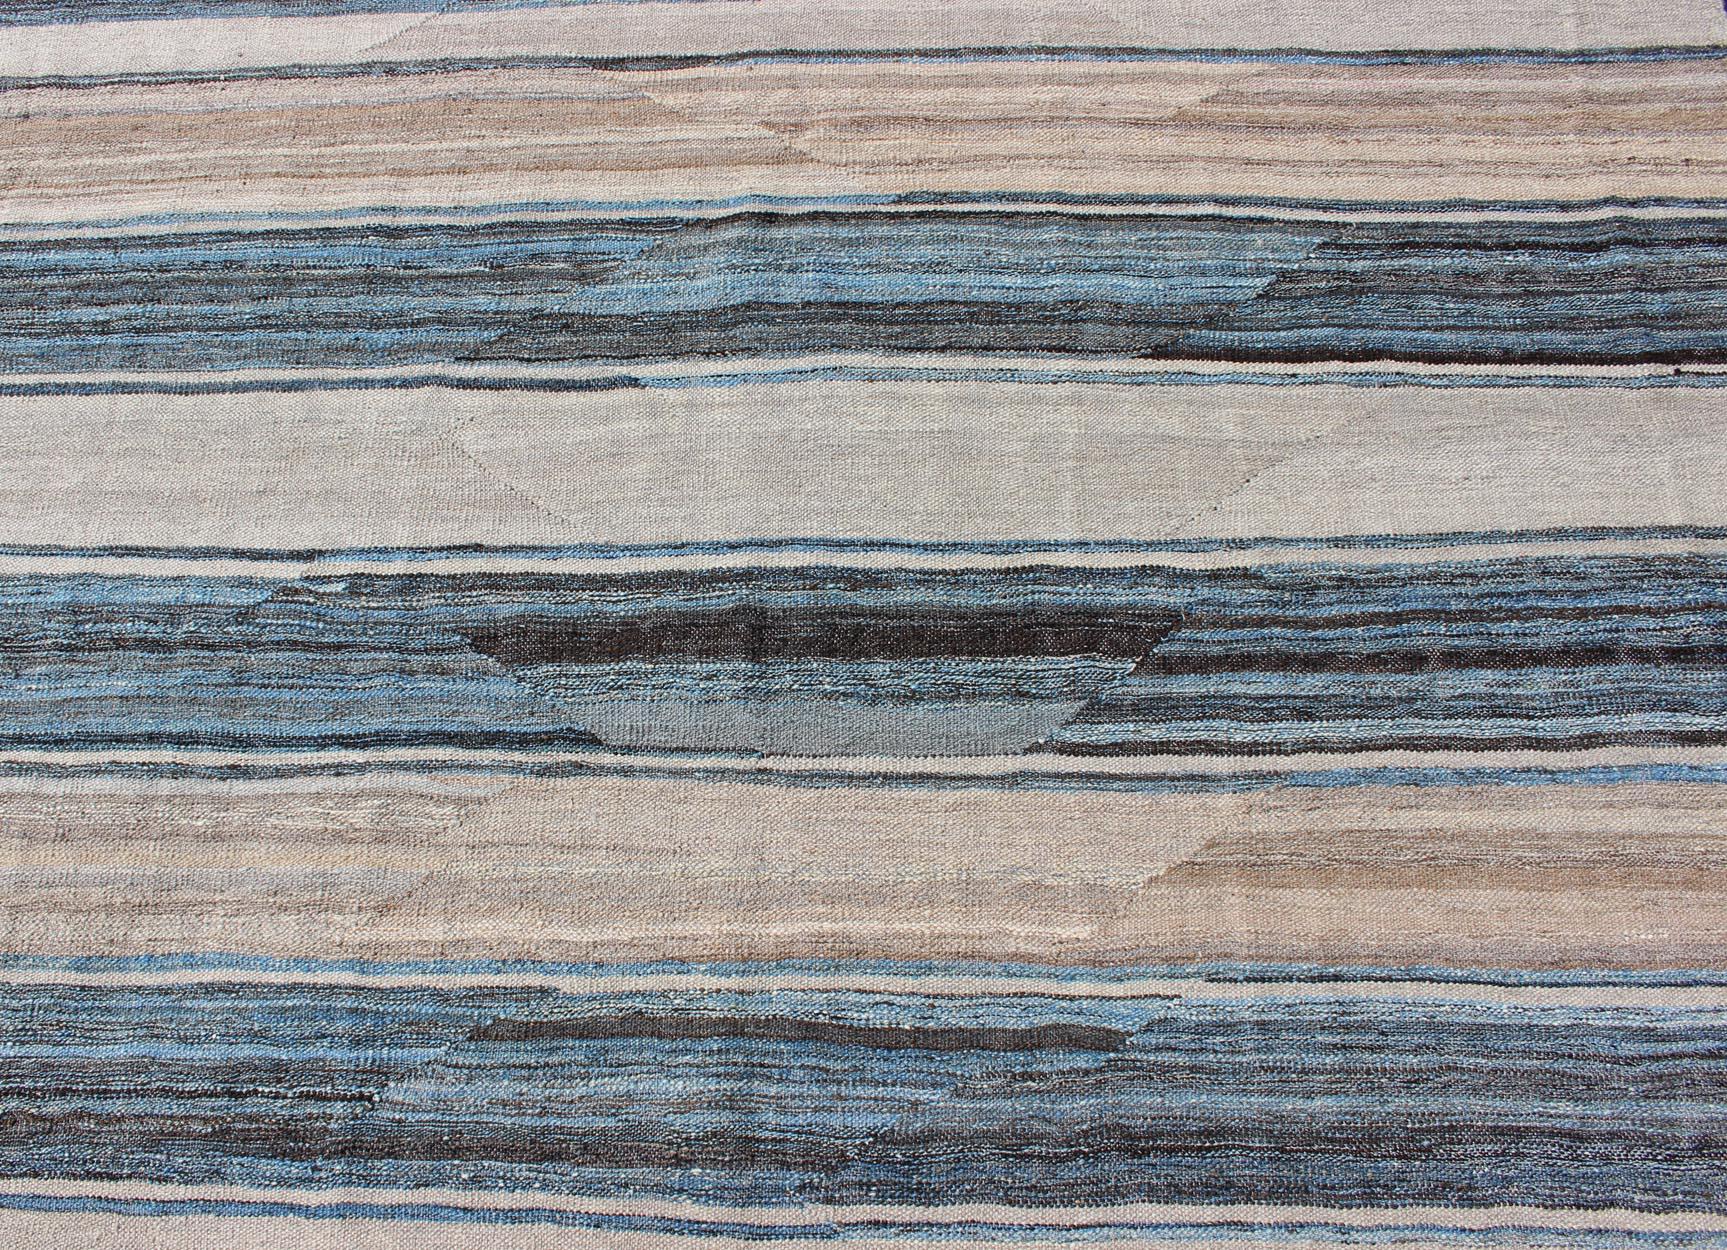 Wool Flat-Weave Modern Kilim Rug with Stripes in Shades of Blue, Charcoal and Ivory For Sale